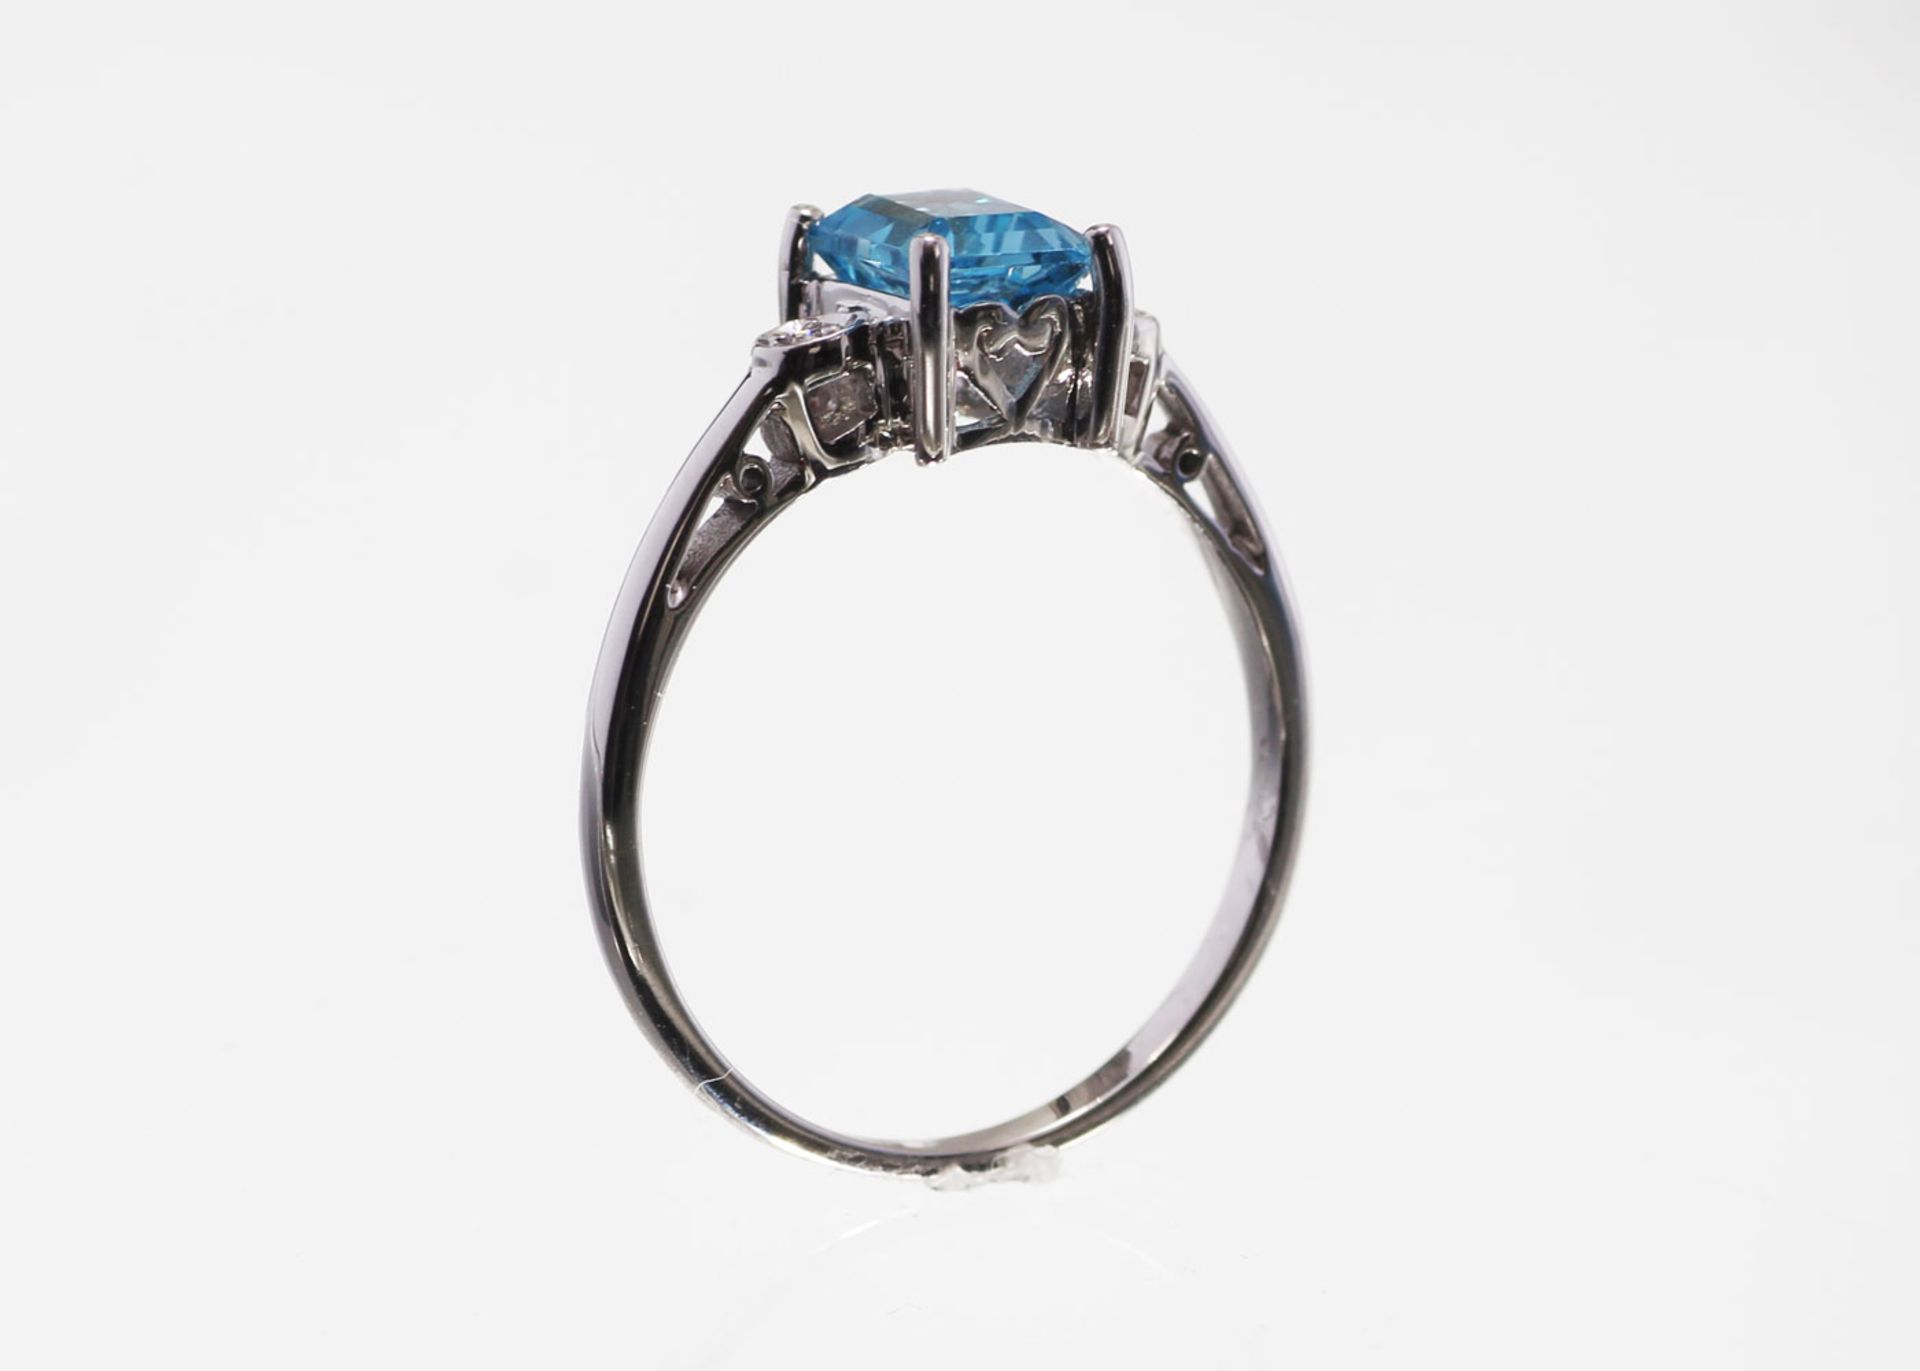 9ct White Gold Blue Topaz Diamond Ring 0.02 Carats - Valued by GIE £1,220.00 - 9ct White Gold Blue - Image 3 of 5